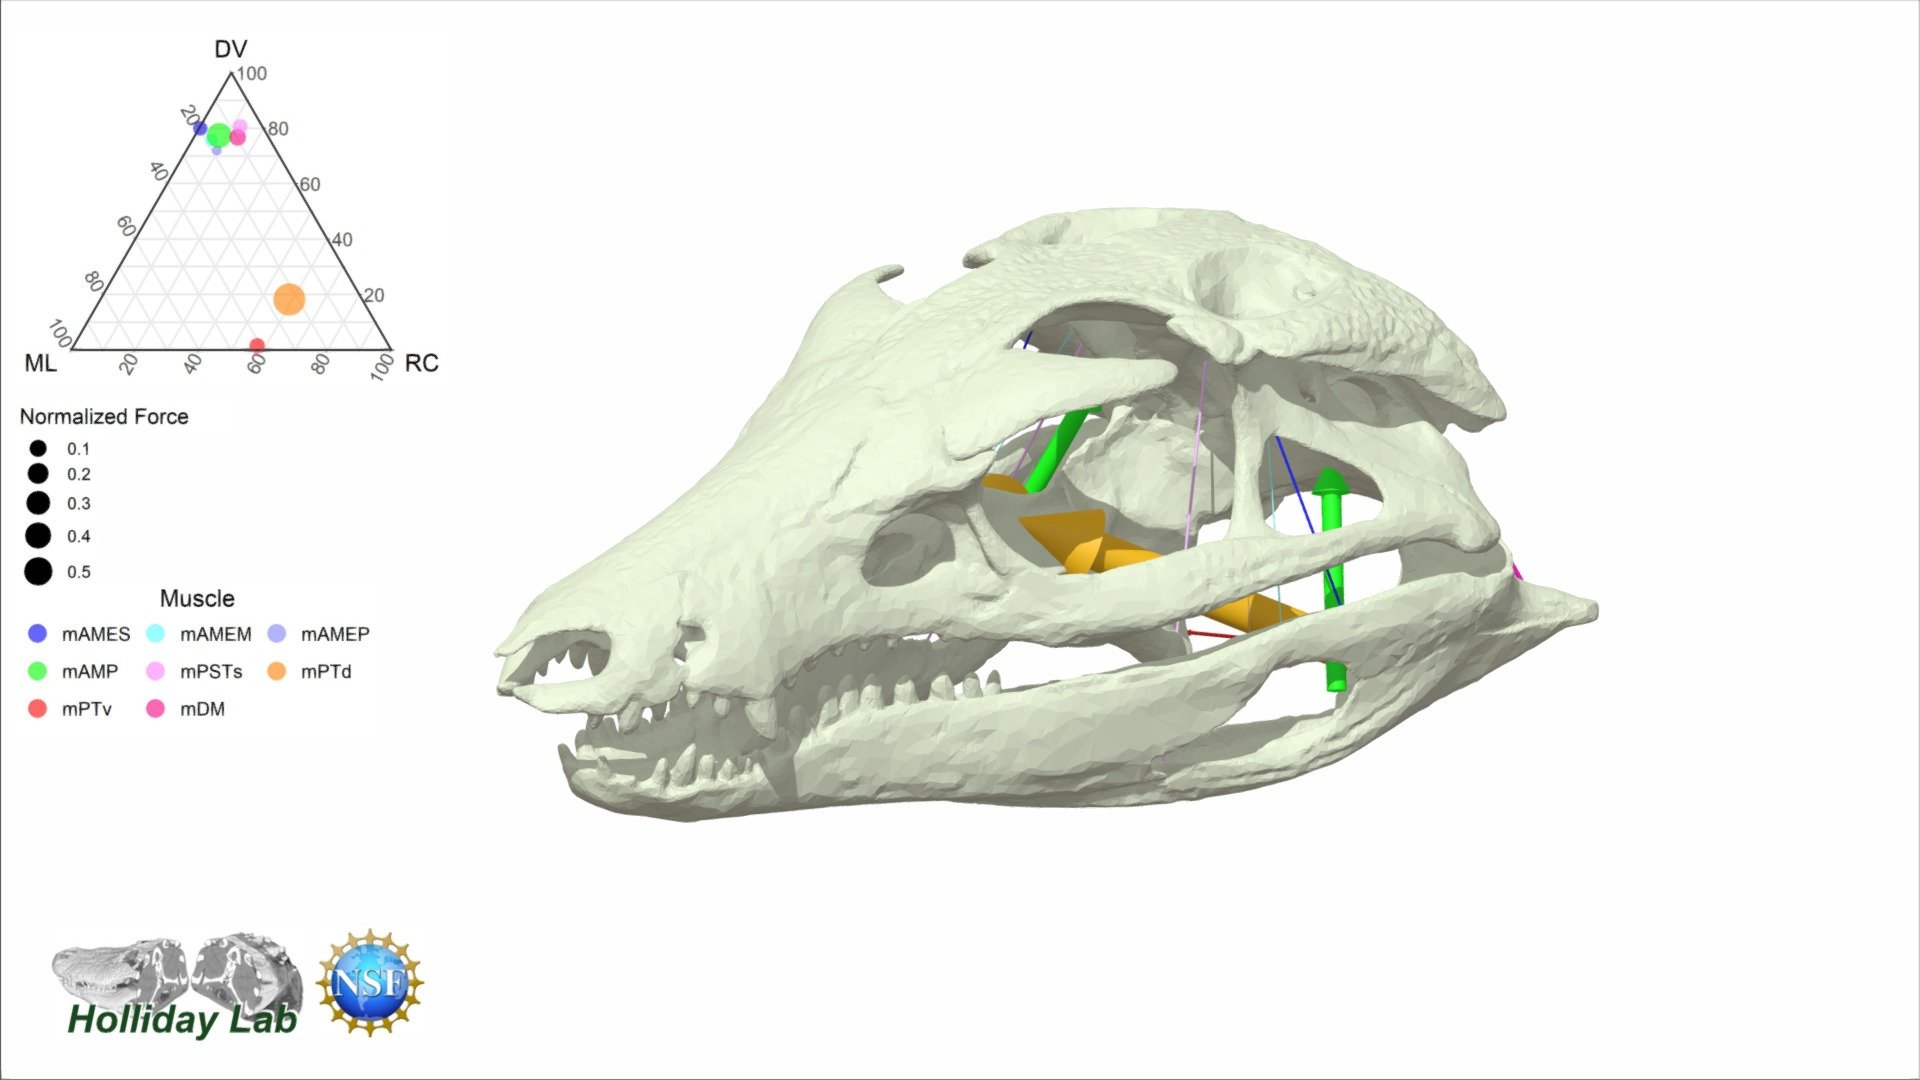 This 3D model of the terrestrial, omnivorous notosuchian crocodyliform Araripesuchus gomessi (AMNH 24450) from the Early Cretaceous part of the Santana group of the Araripe Basin of Northeastern Brazil. Araripesuchus has heterodont teeth and slender legs. This specimen is a nearly immaculate, acid prepared, articulated skeleton.  Read more on how the evolution of skull shape in crocodilians affected jaw muscle function in Sellers et al (2022) in in Anatomical Record: https://doi.org/10.1002/ar.24912. Thanks to Diego Pol and Mark Norell for sharing the data.  Thanks to National Science Foundation 1631684 for supporting the work 3d model